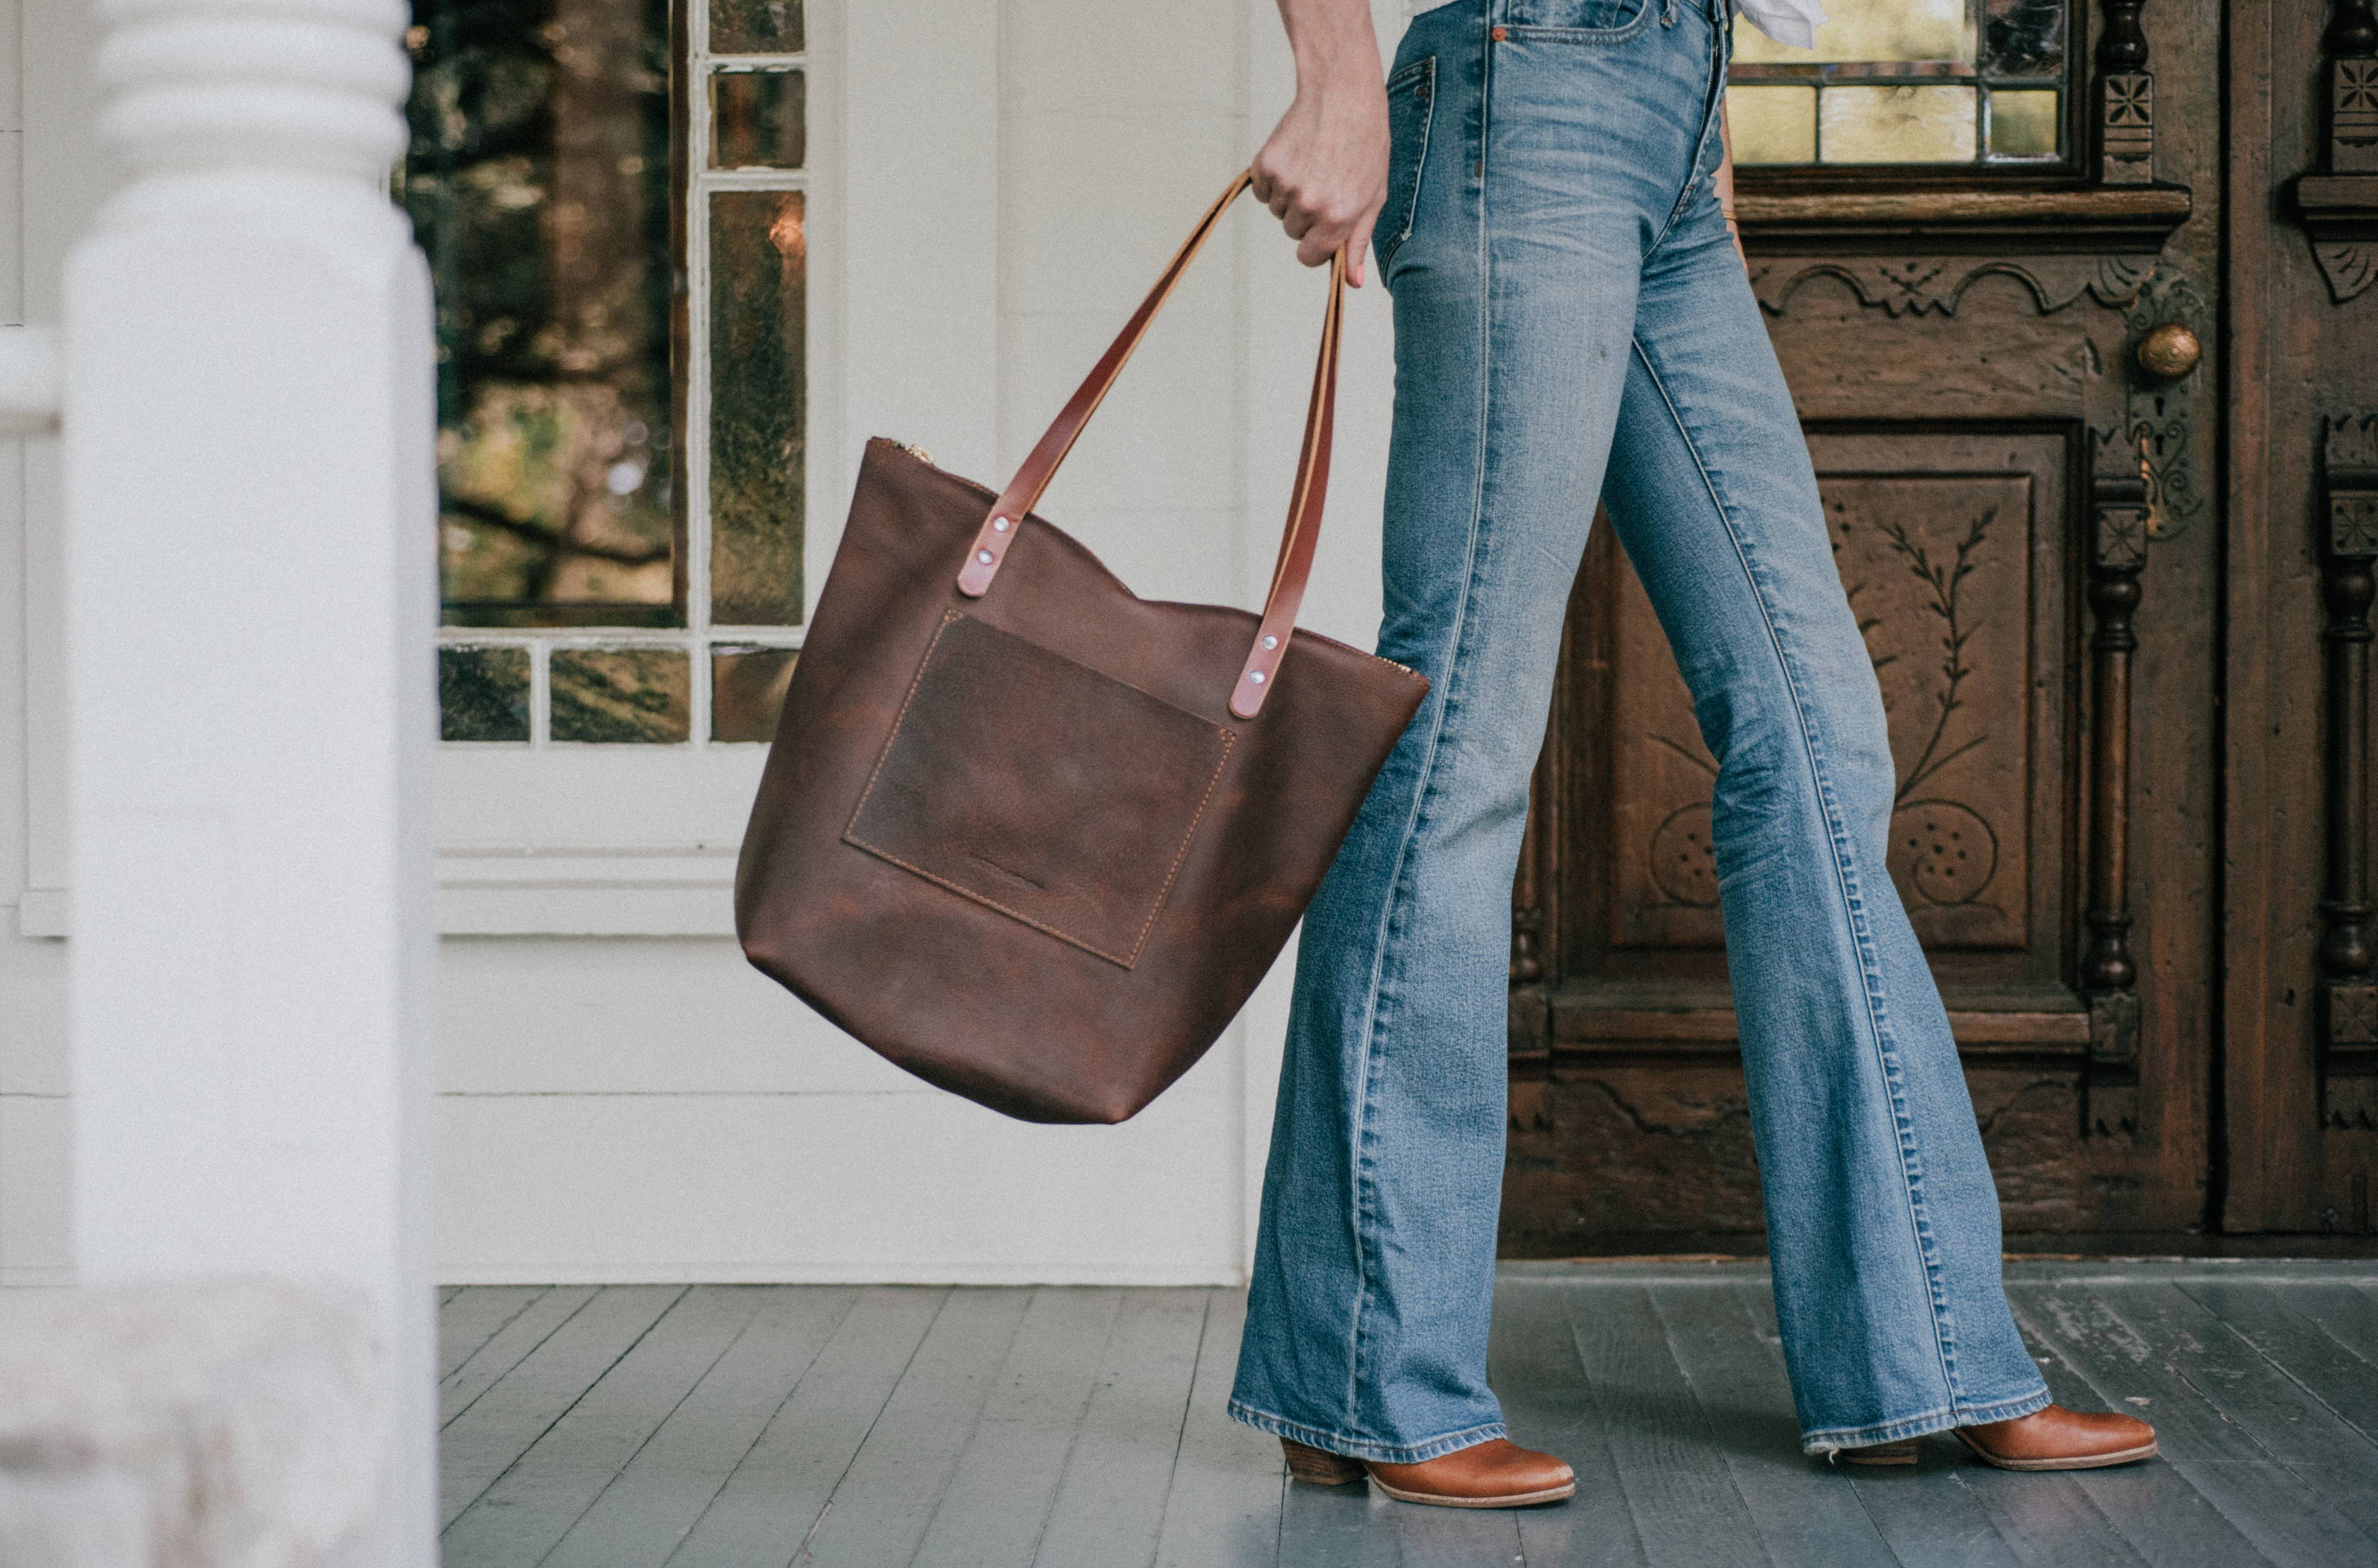 Hatton Henry | Gorgeous Leather Bags & Accessories Handmade in Austin